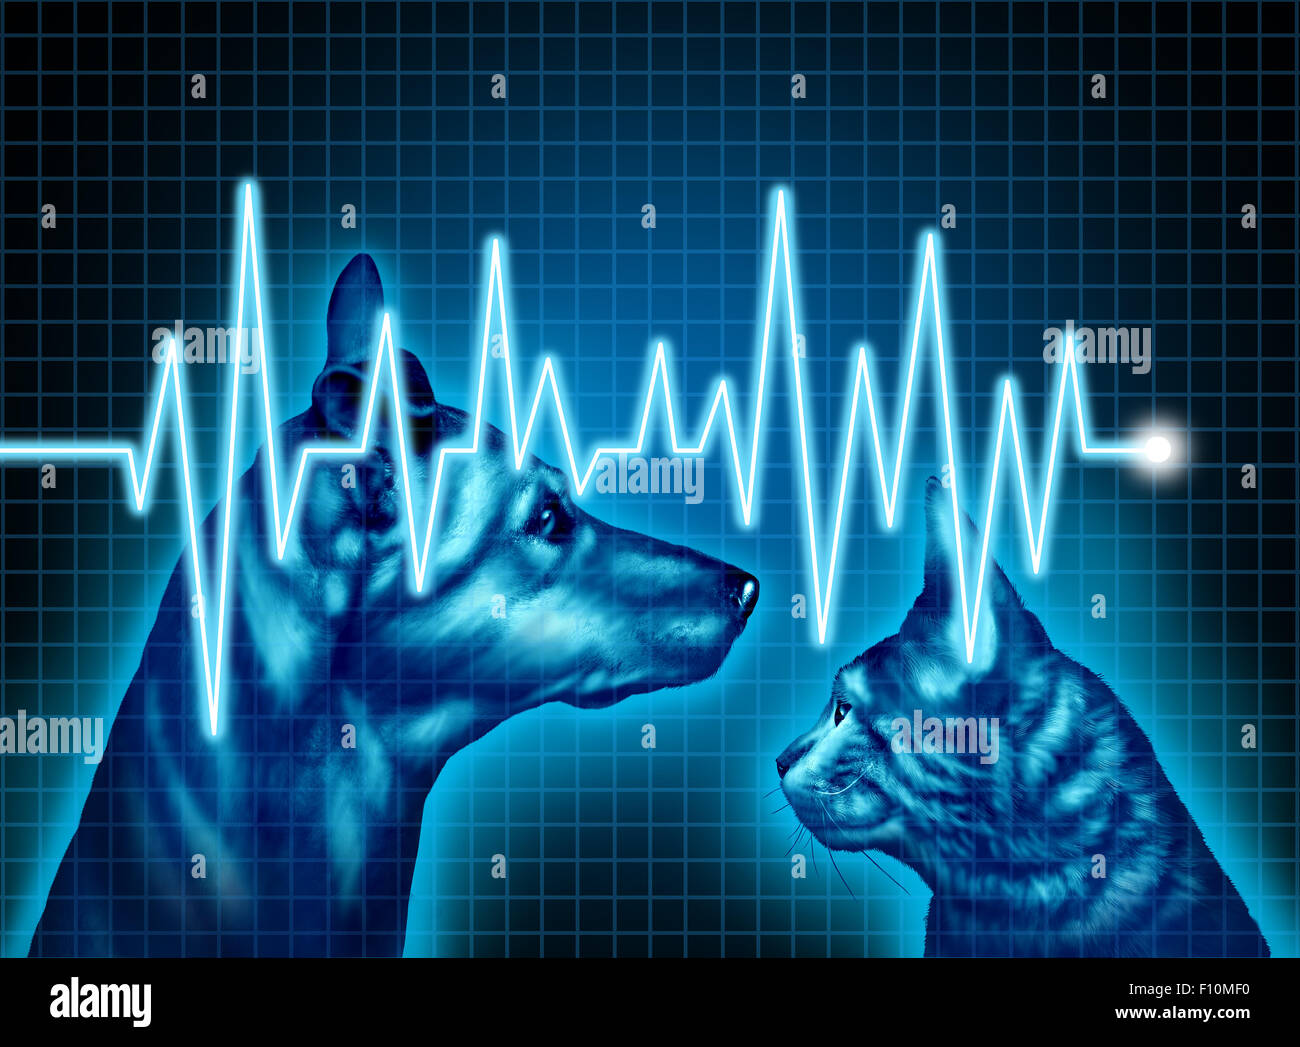 Pet health care and medical insurance for pets concept as an illustration of a dog and cat with an ecg or ekg monitor lifeline as a veterinary symbol and veterinarian doctor services. Stock Photo